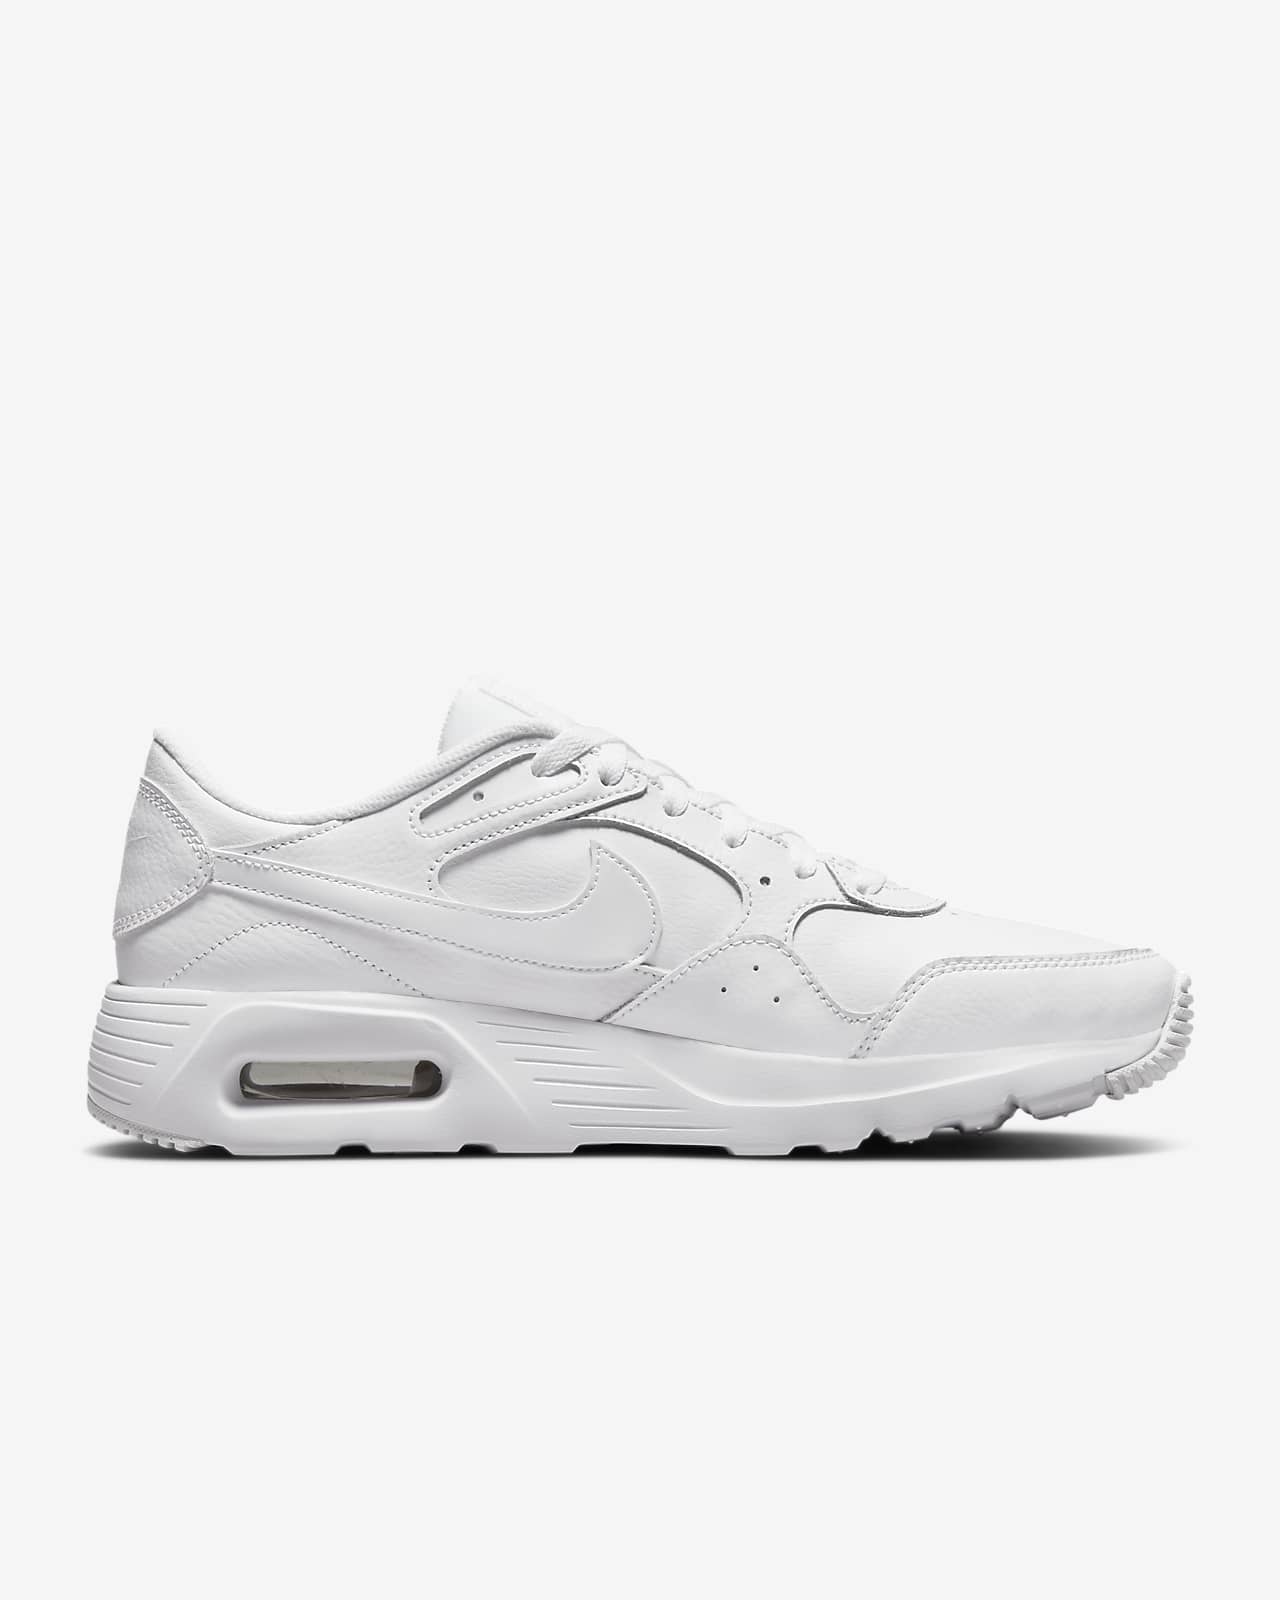 Nike Air Leather ID Shoes. SC Max Men\'s Nike